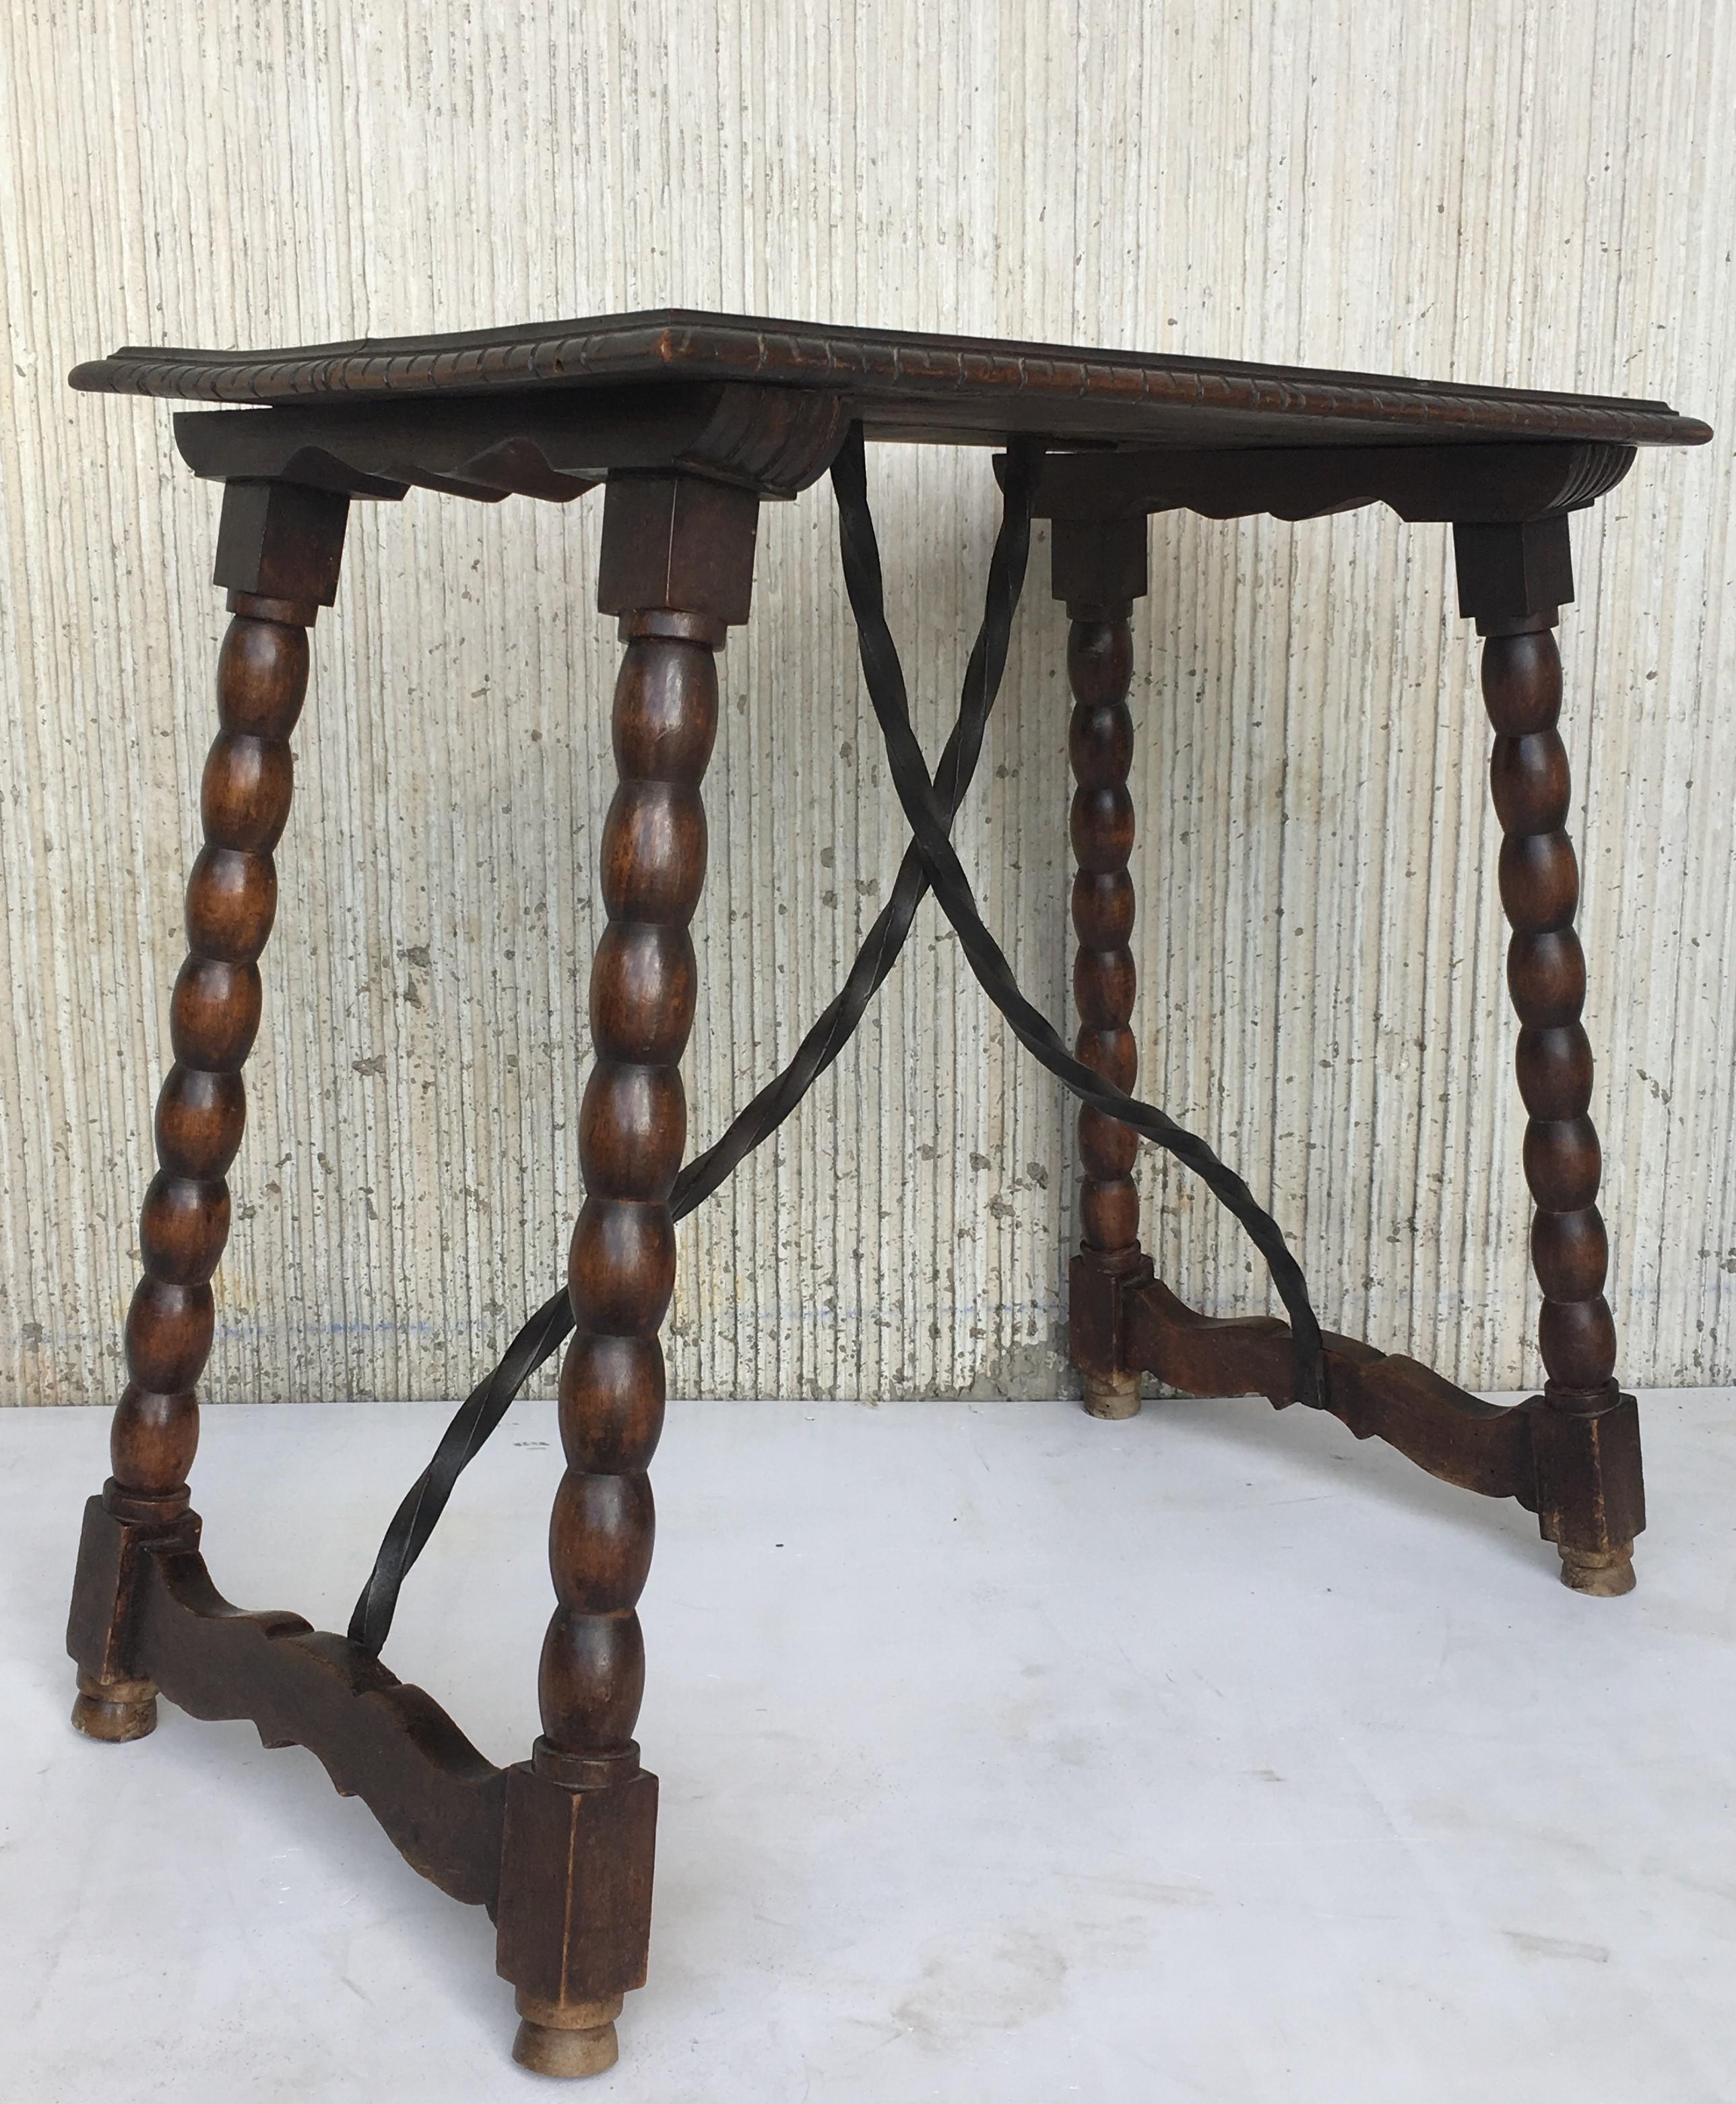 19th Century Spanish Baroque ebonized side table with iron stretcher and carved top in walnut.